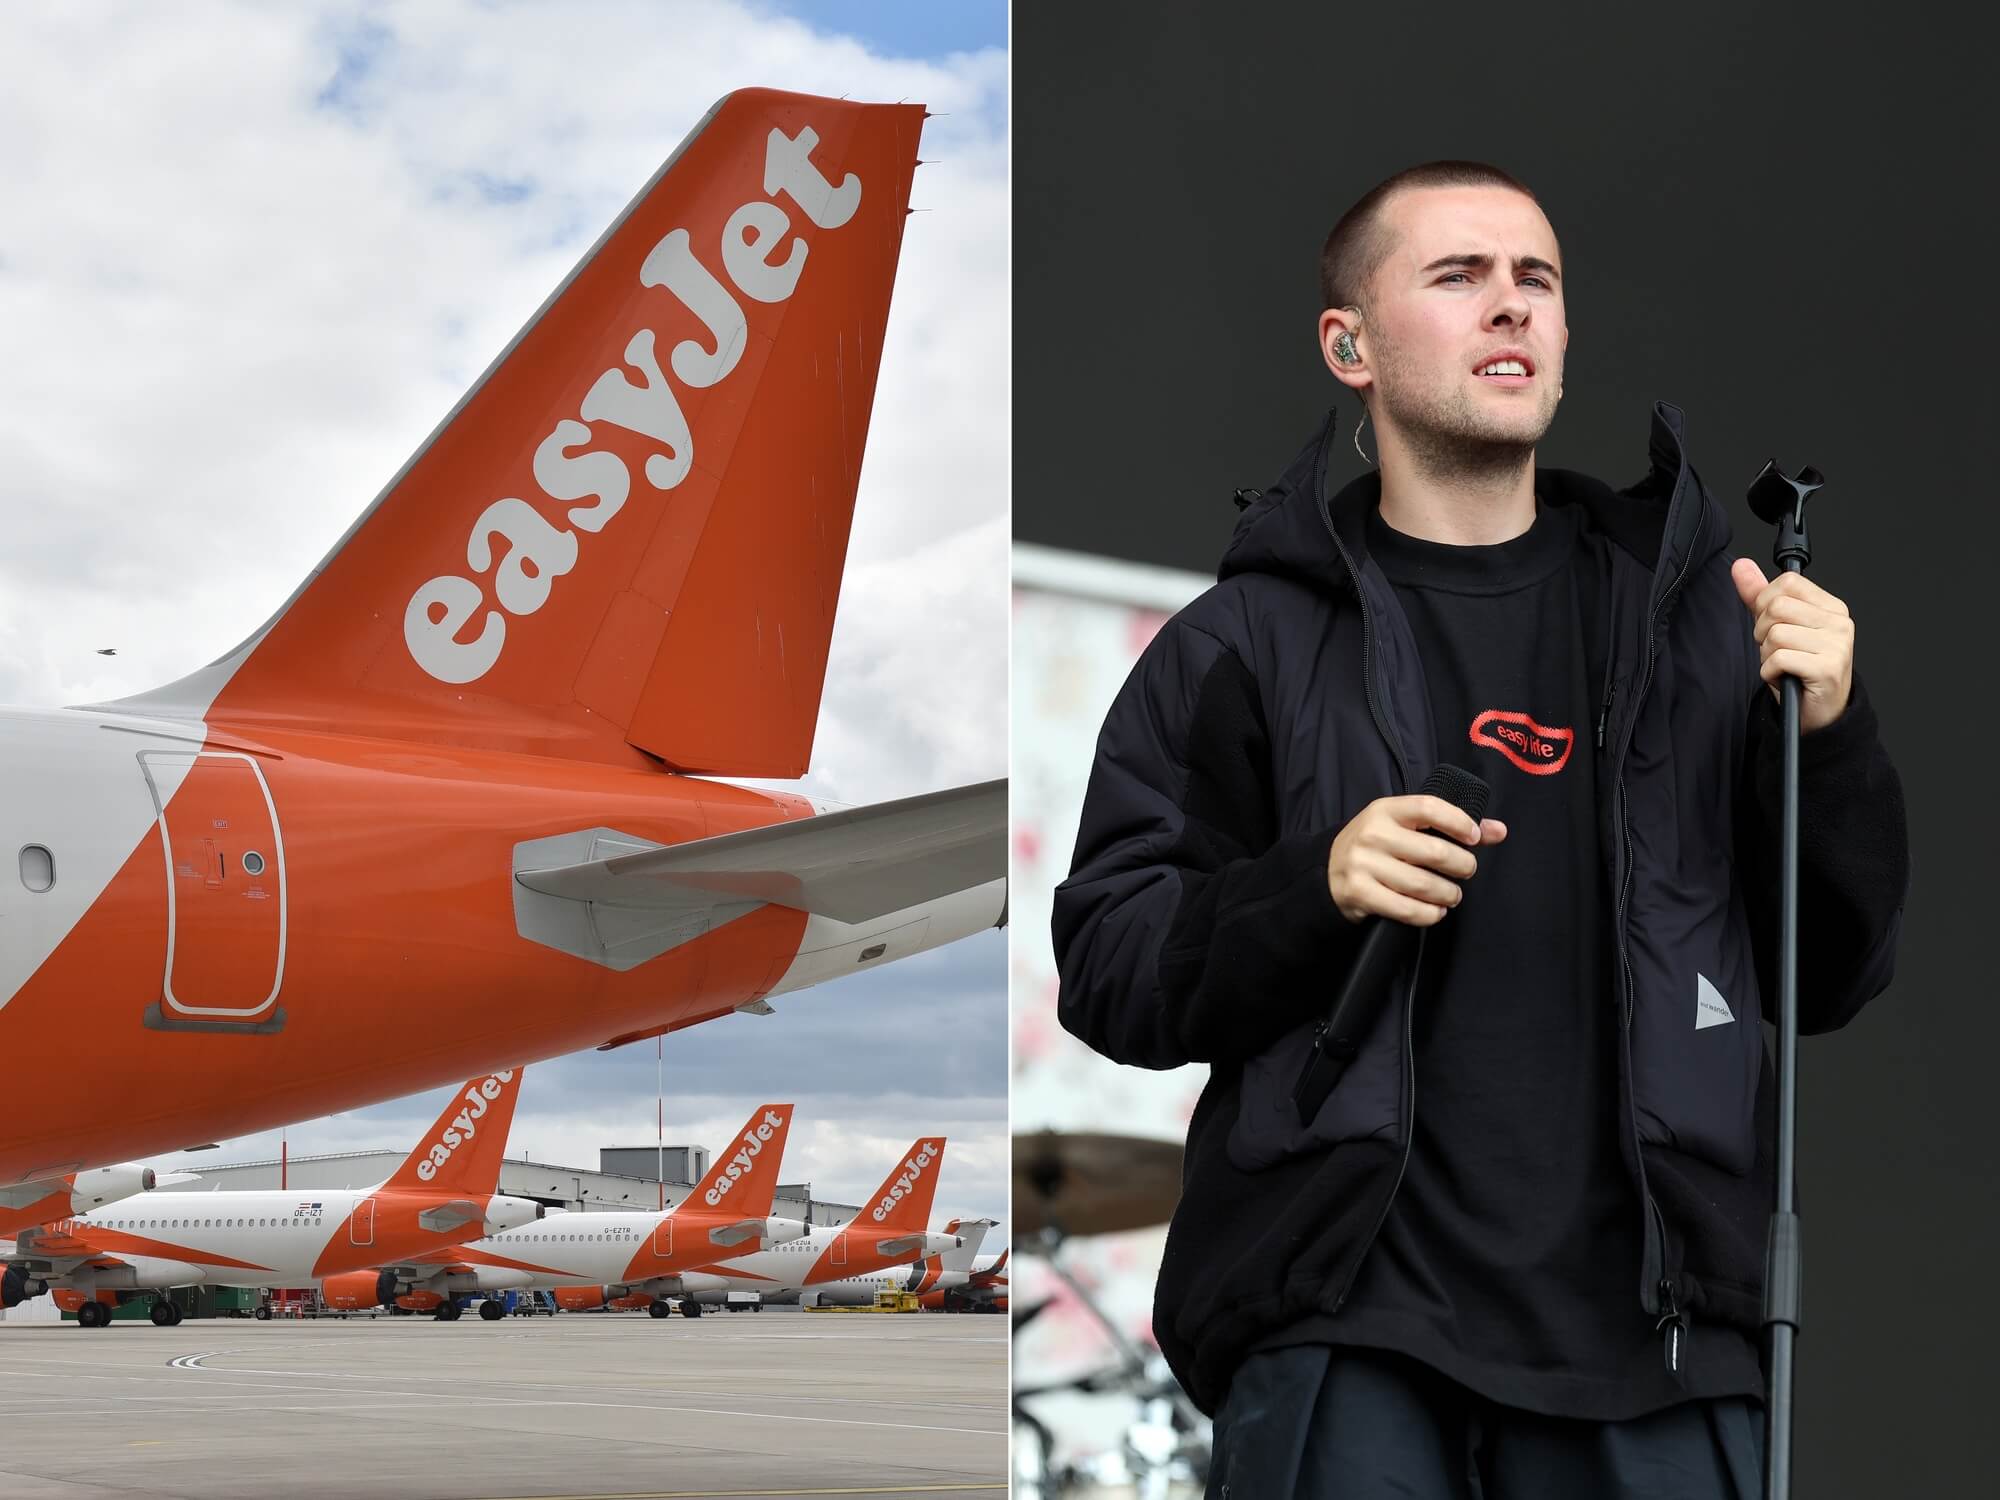 EasyJet and Easy Life